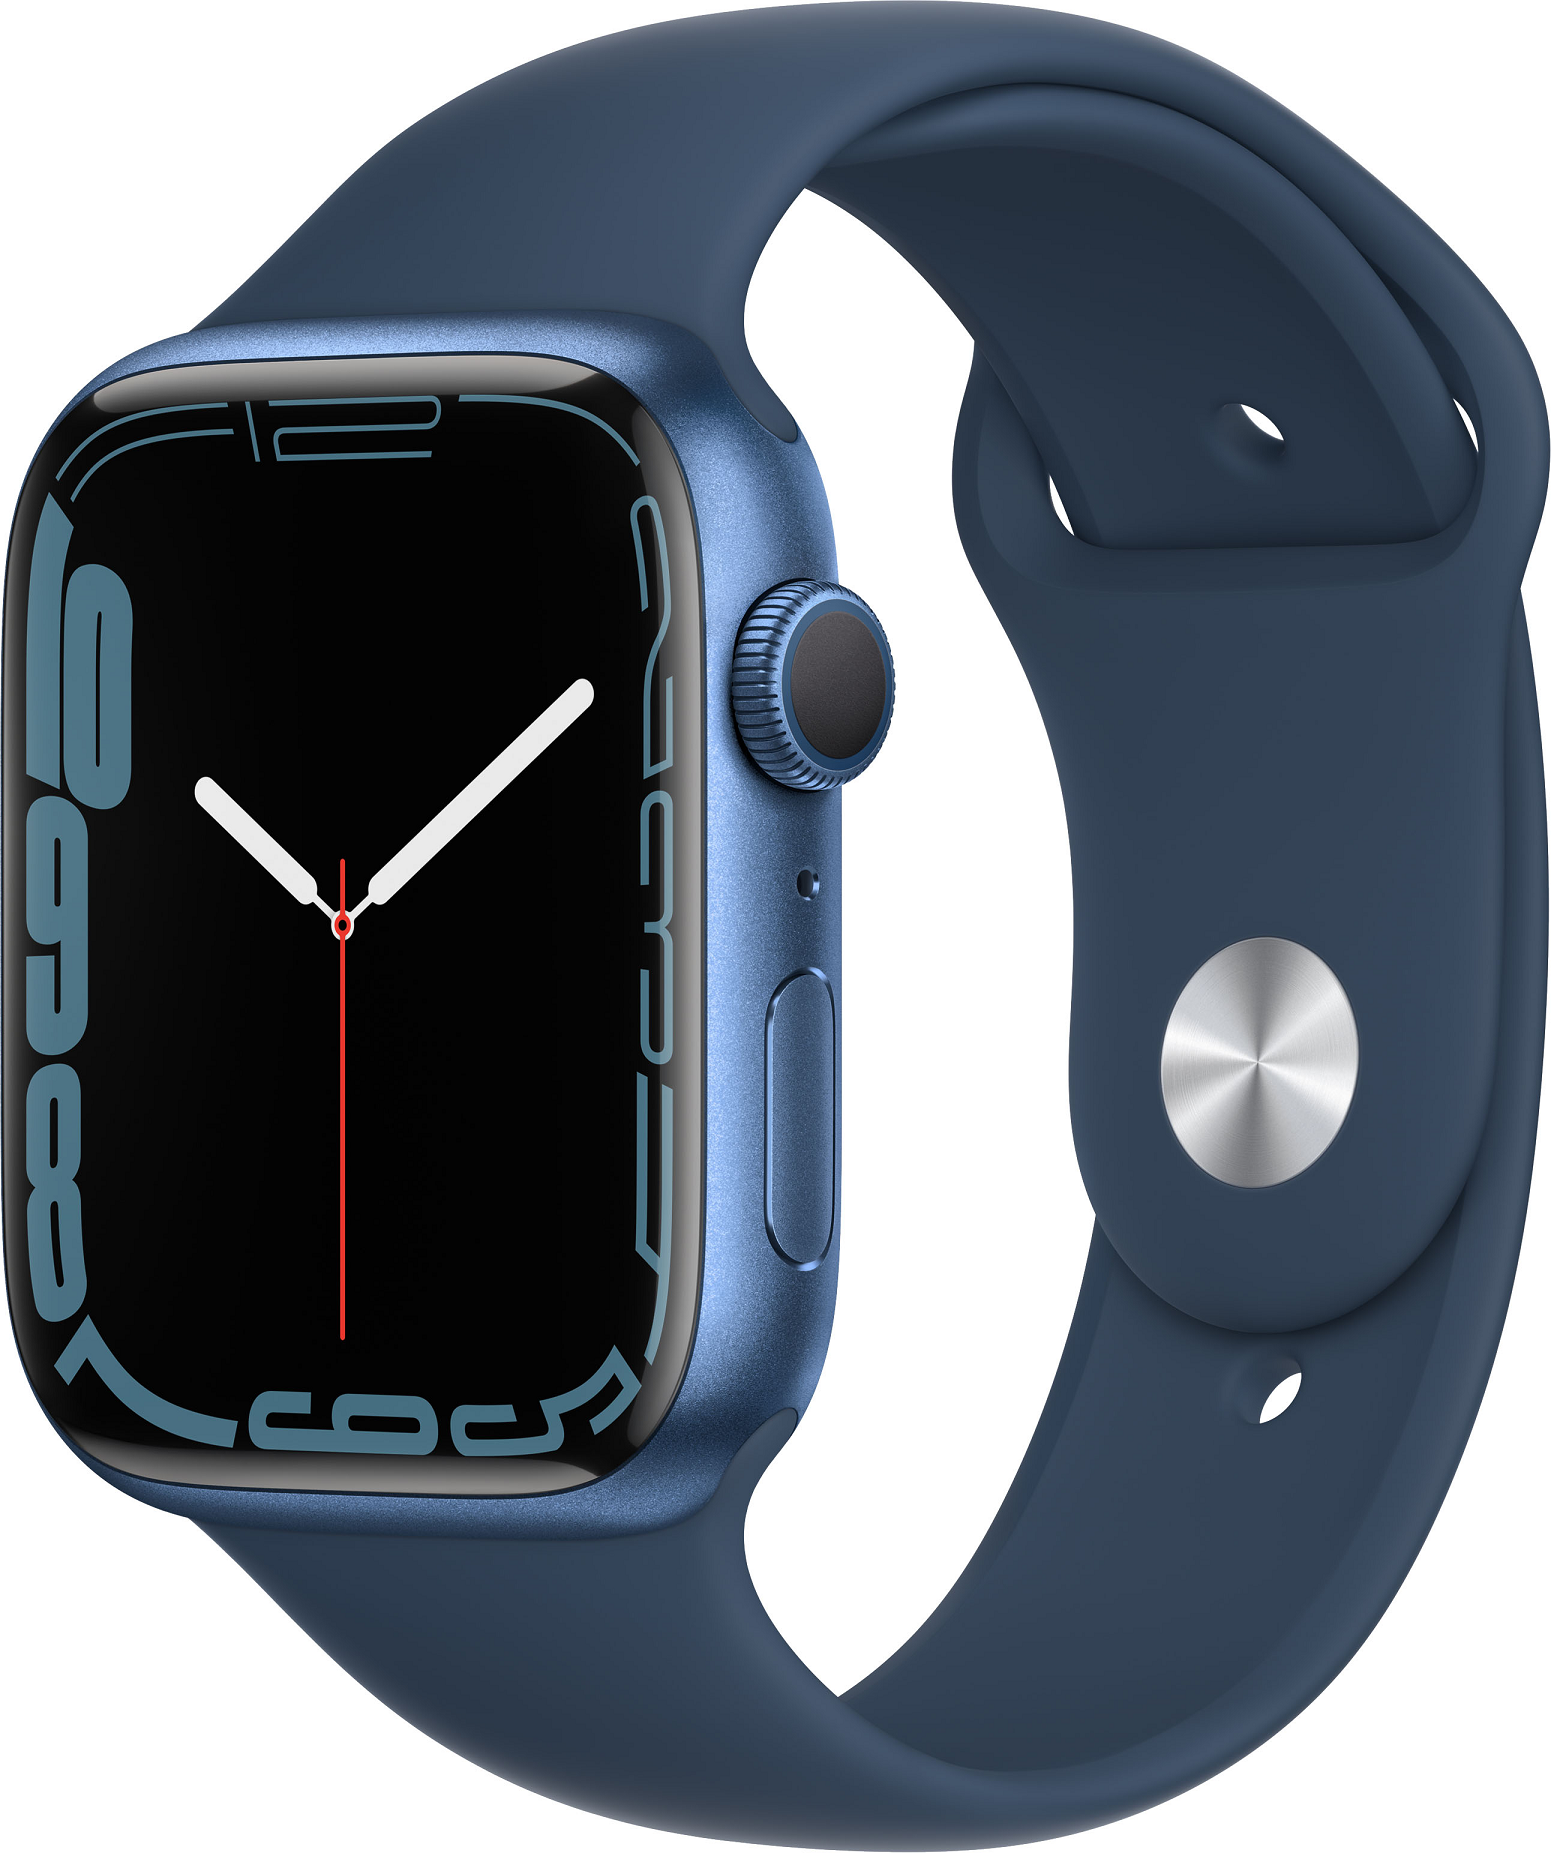 Apple Watch Series 7 (GPS) 45mm Blue Aluminum Case with Abyss Blue Sport Band - Blue